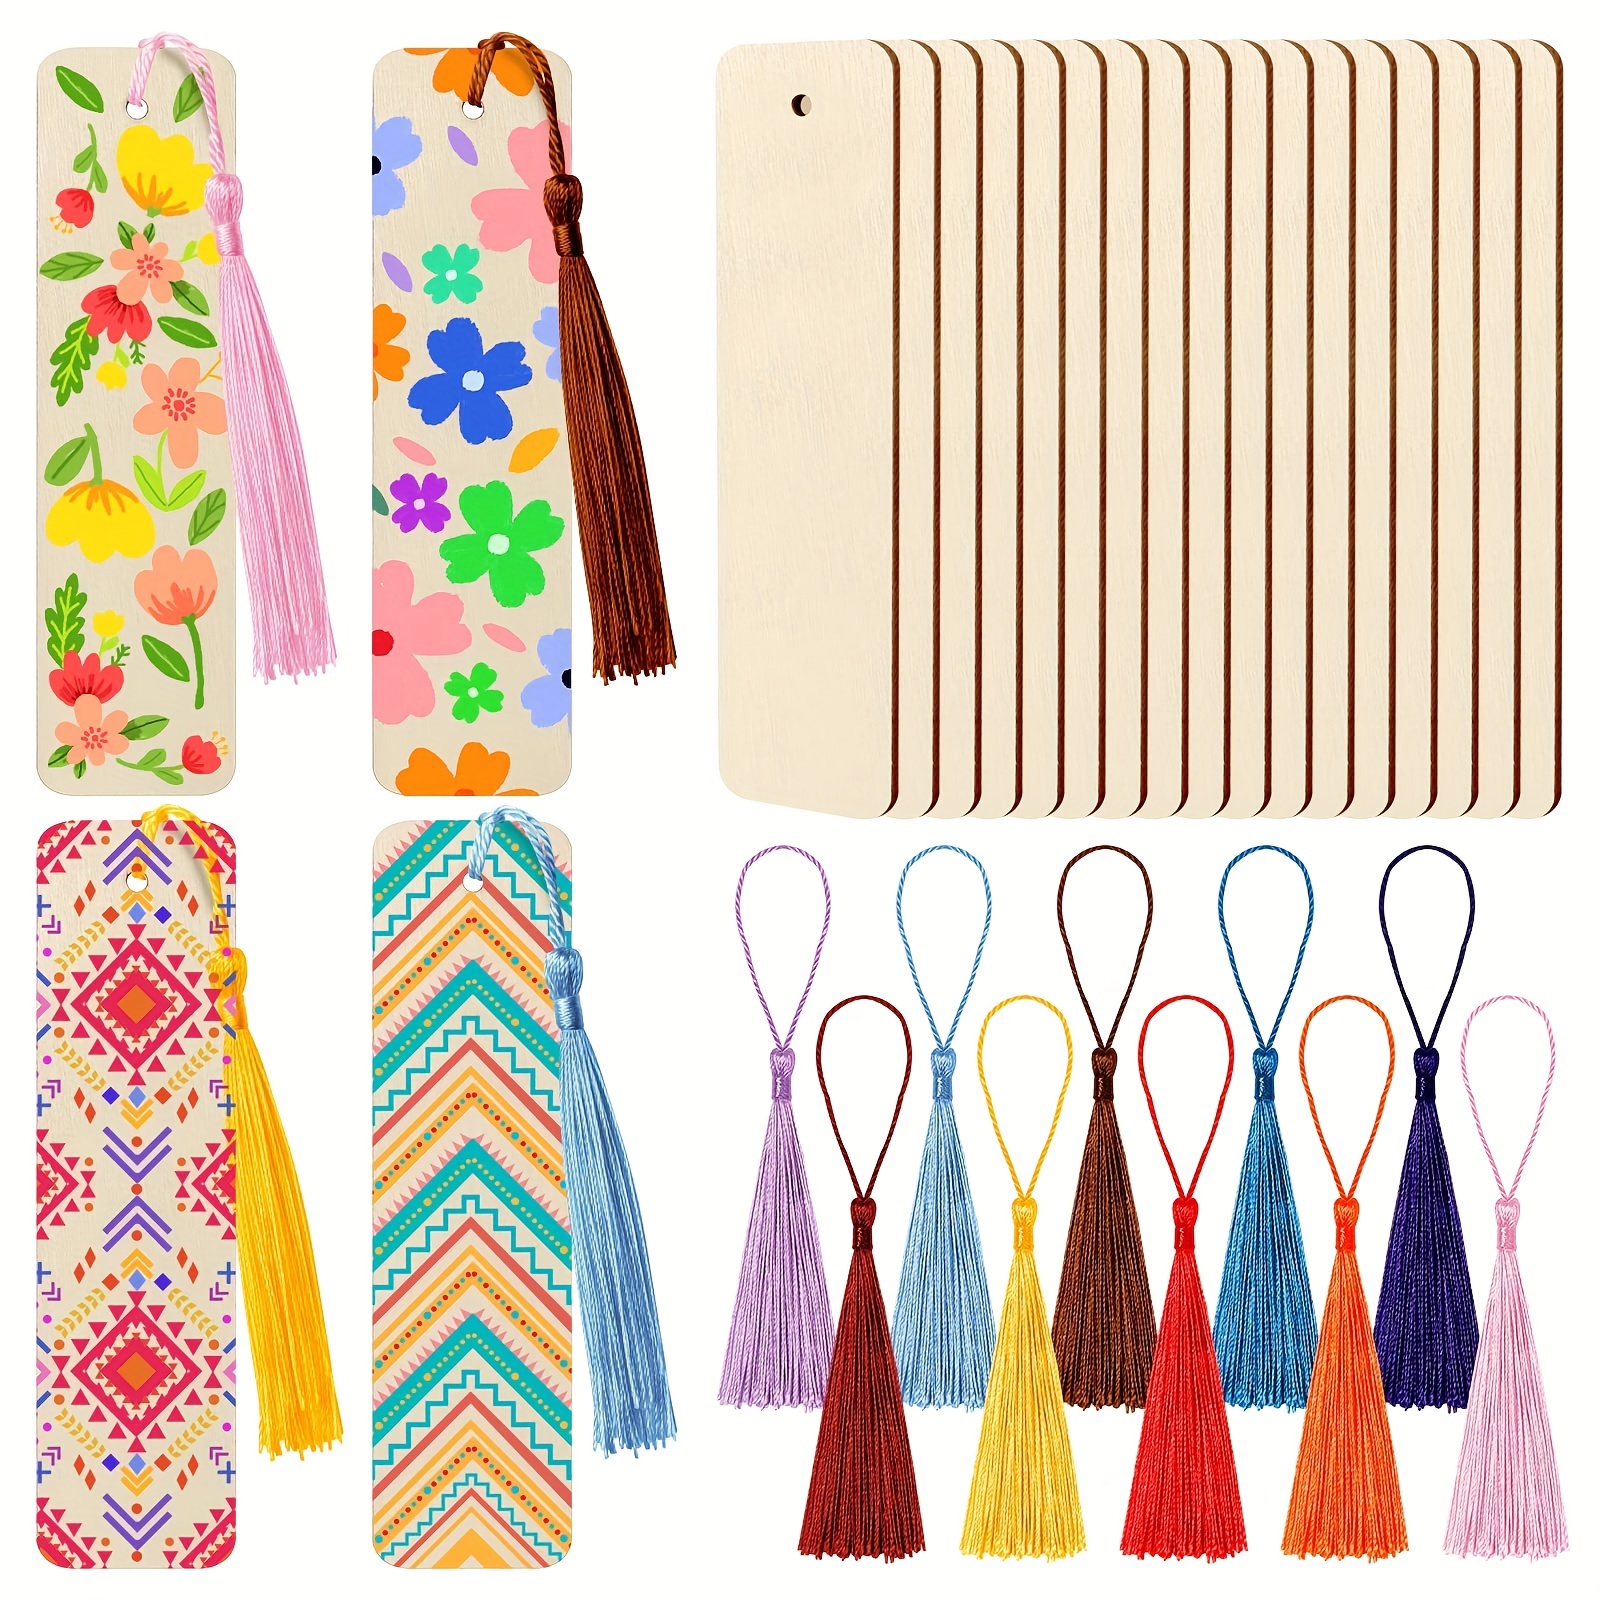 

40pcs/100pcs Wood Bookmark With Colorful Tassels, Wooden Bookmarks Ornament Hanging Tag With Holes For Diy Project Christmas